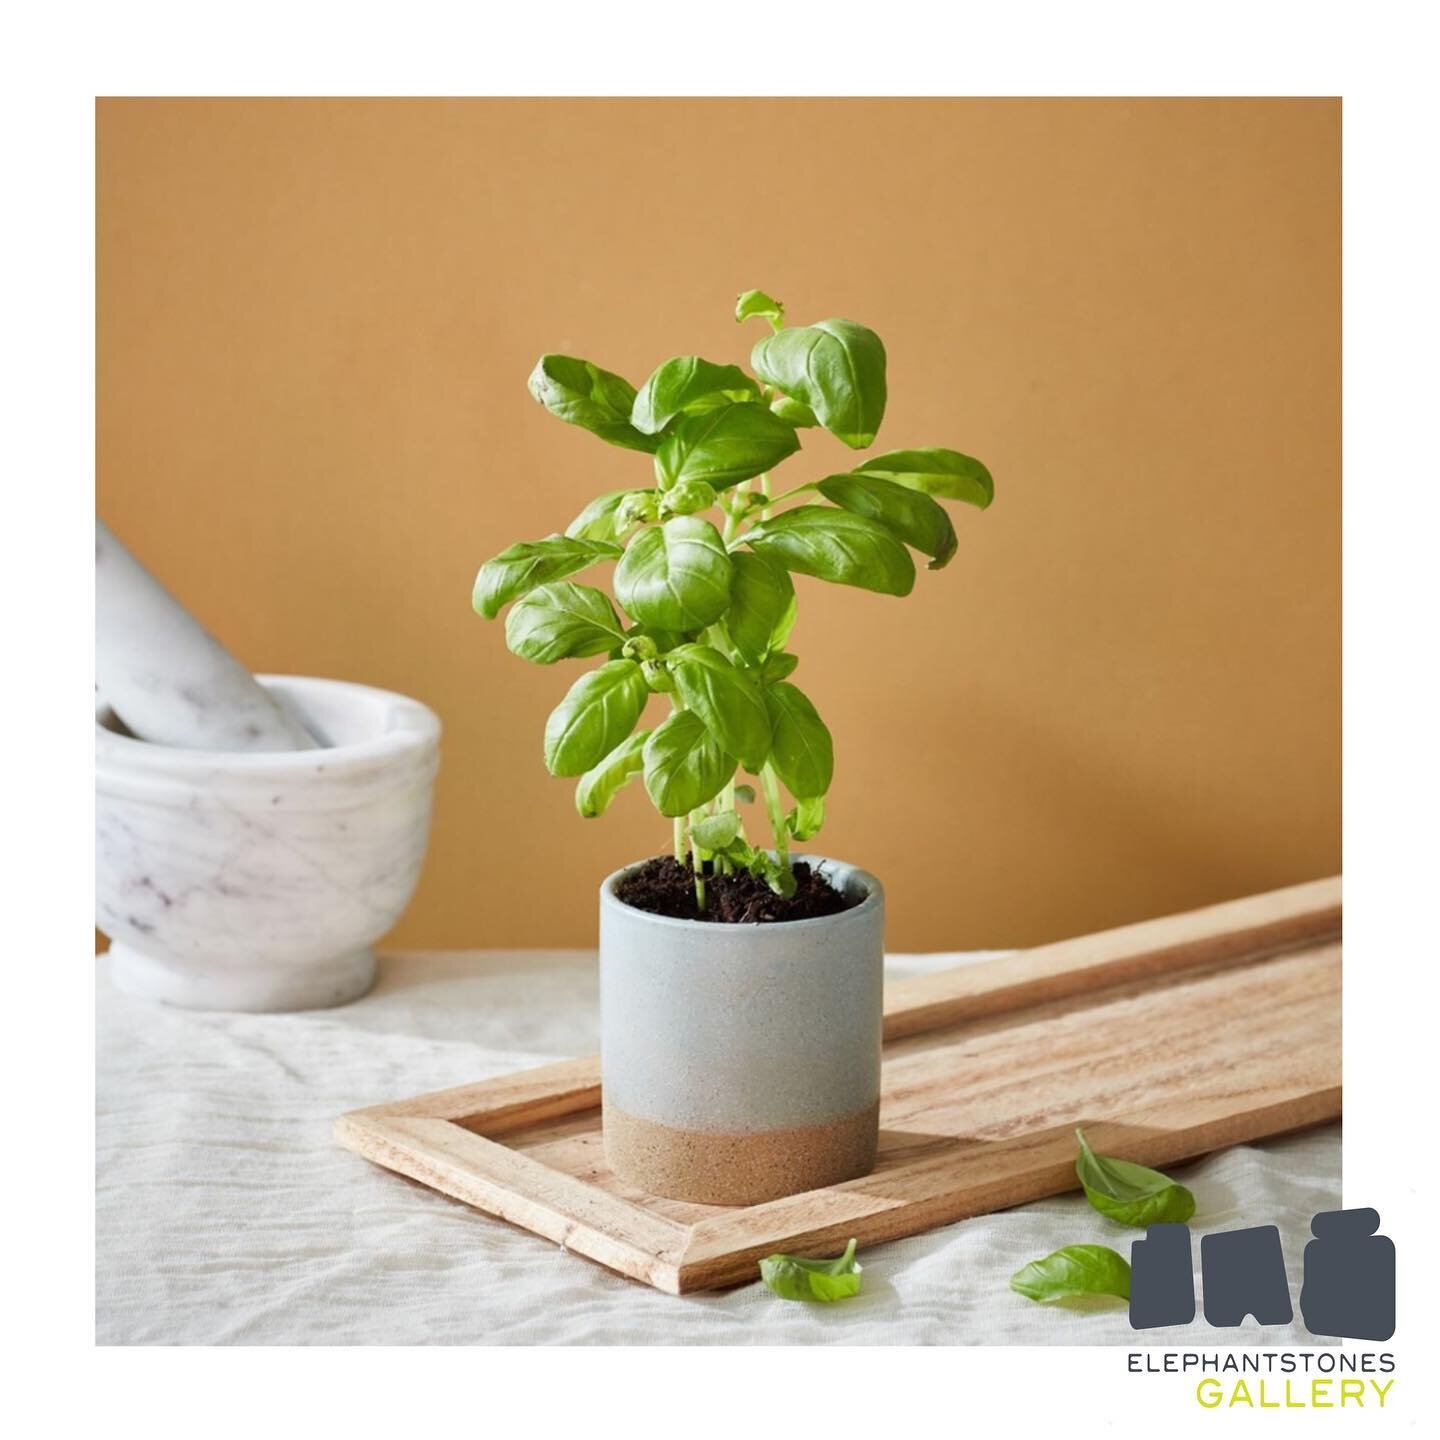 We love seeing how the pots from our candles can be reused! ♻️ Look how perfect they are for growing basil! 🍃
-
Shop our potted candles at the gallery or online and enjoy gorgeous aromas and light followed by the perfect plant pot!
-
Visit us today,